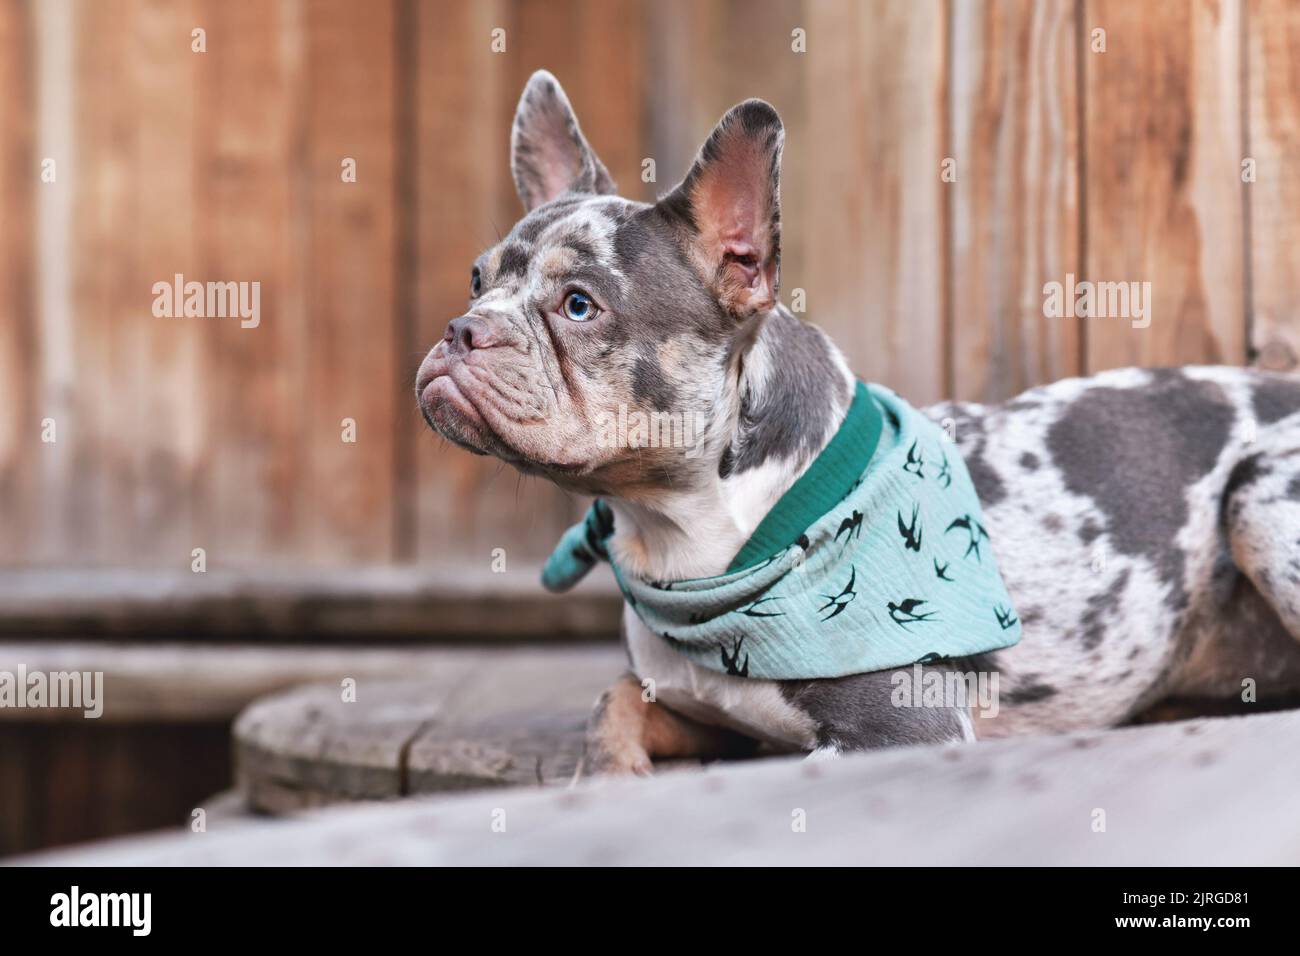 French Bulldog dog with green neckerchief lying down between wooden industrial cable drums Stock Photo